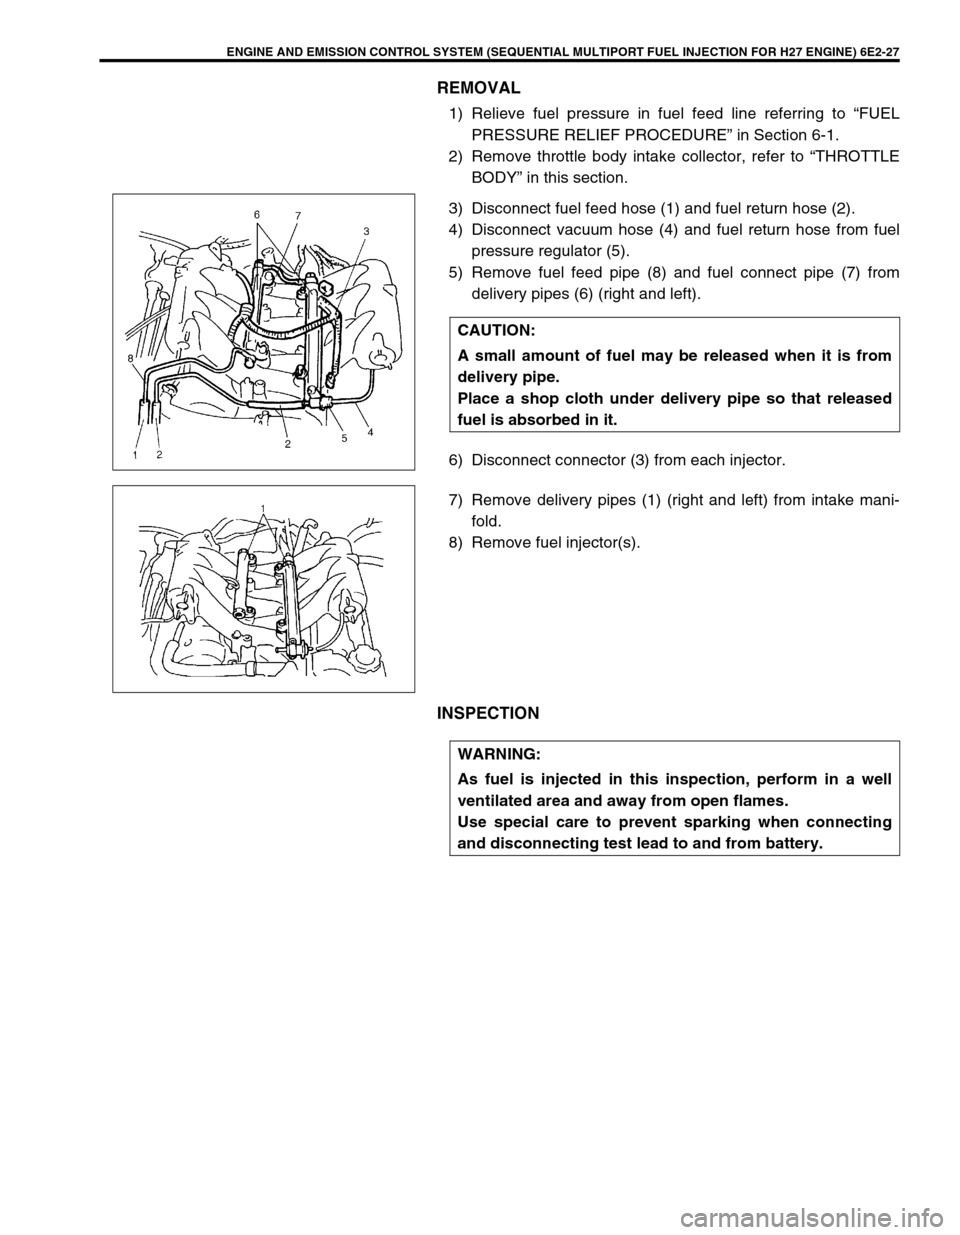 SUZUKI GRAND VITARA 1999 2.G Service Manual ENGINE AND EMISSION CONTROL SYSTEM (SEQUENTIAL MULTIPORT FUEL INJECTION FOR H27 ENGINE) 6E2-27
REMOVAL
1) Relieve fuel pressure in fuel feed line referring to “FUEL
PRESSURE RELIEF PROCEDURE” in S